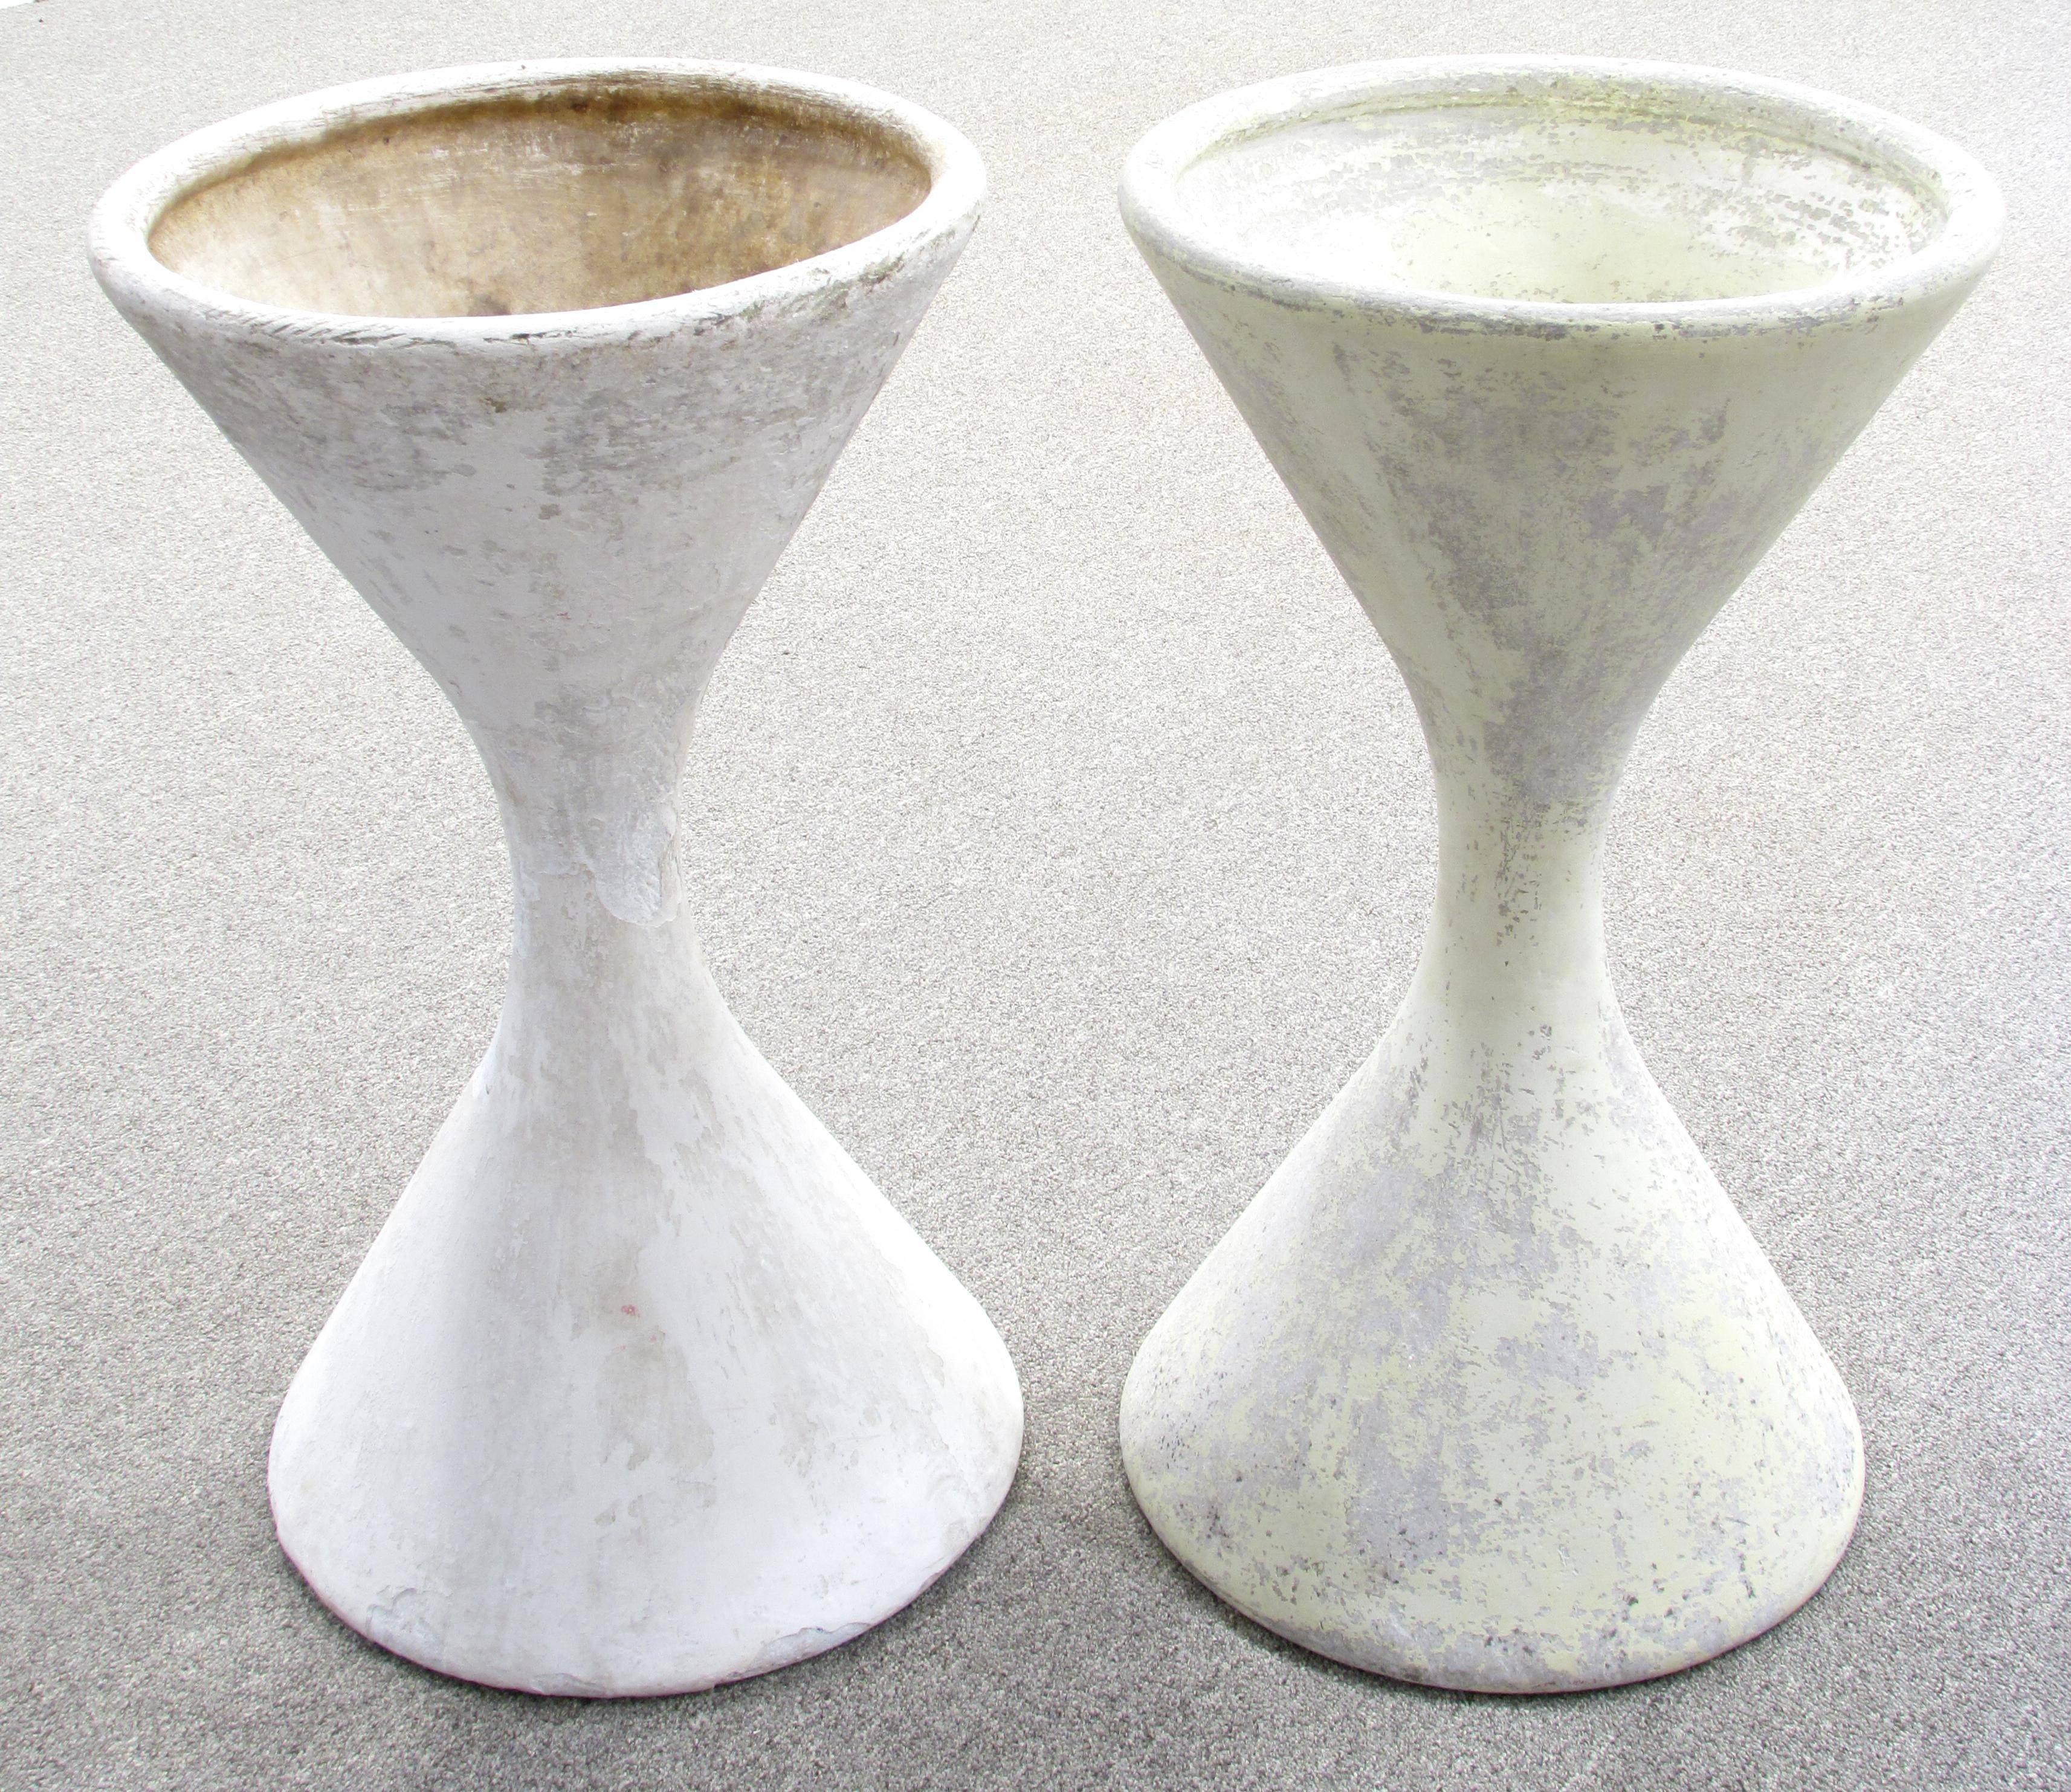 White washed hourglass shape planters designed by architect Willy Guhl and made by Eternit in 1950s of fiber cement.